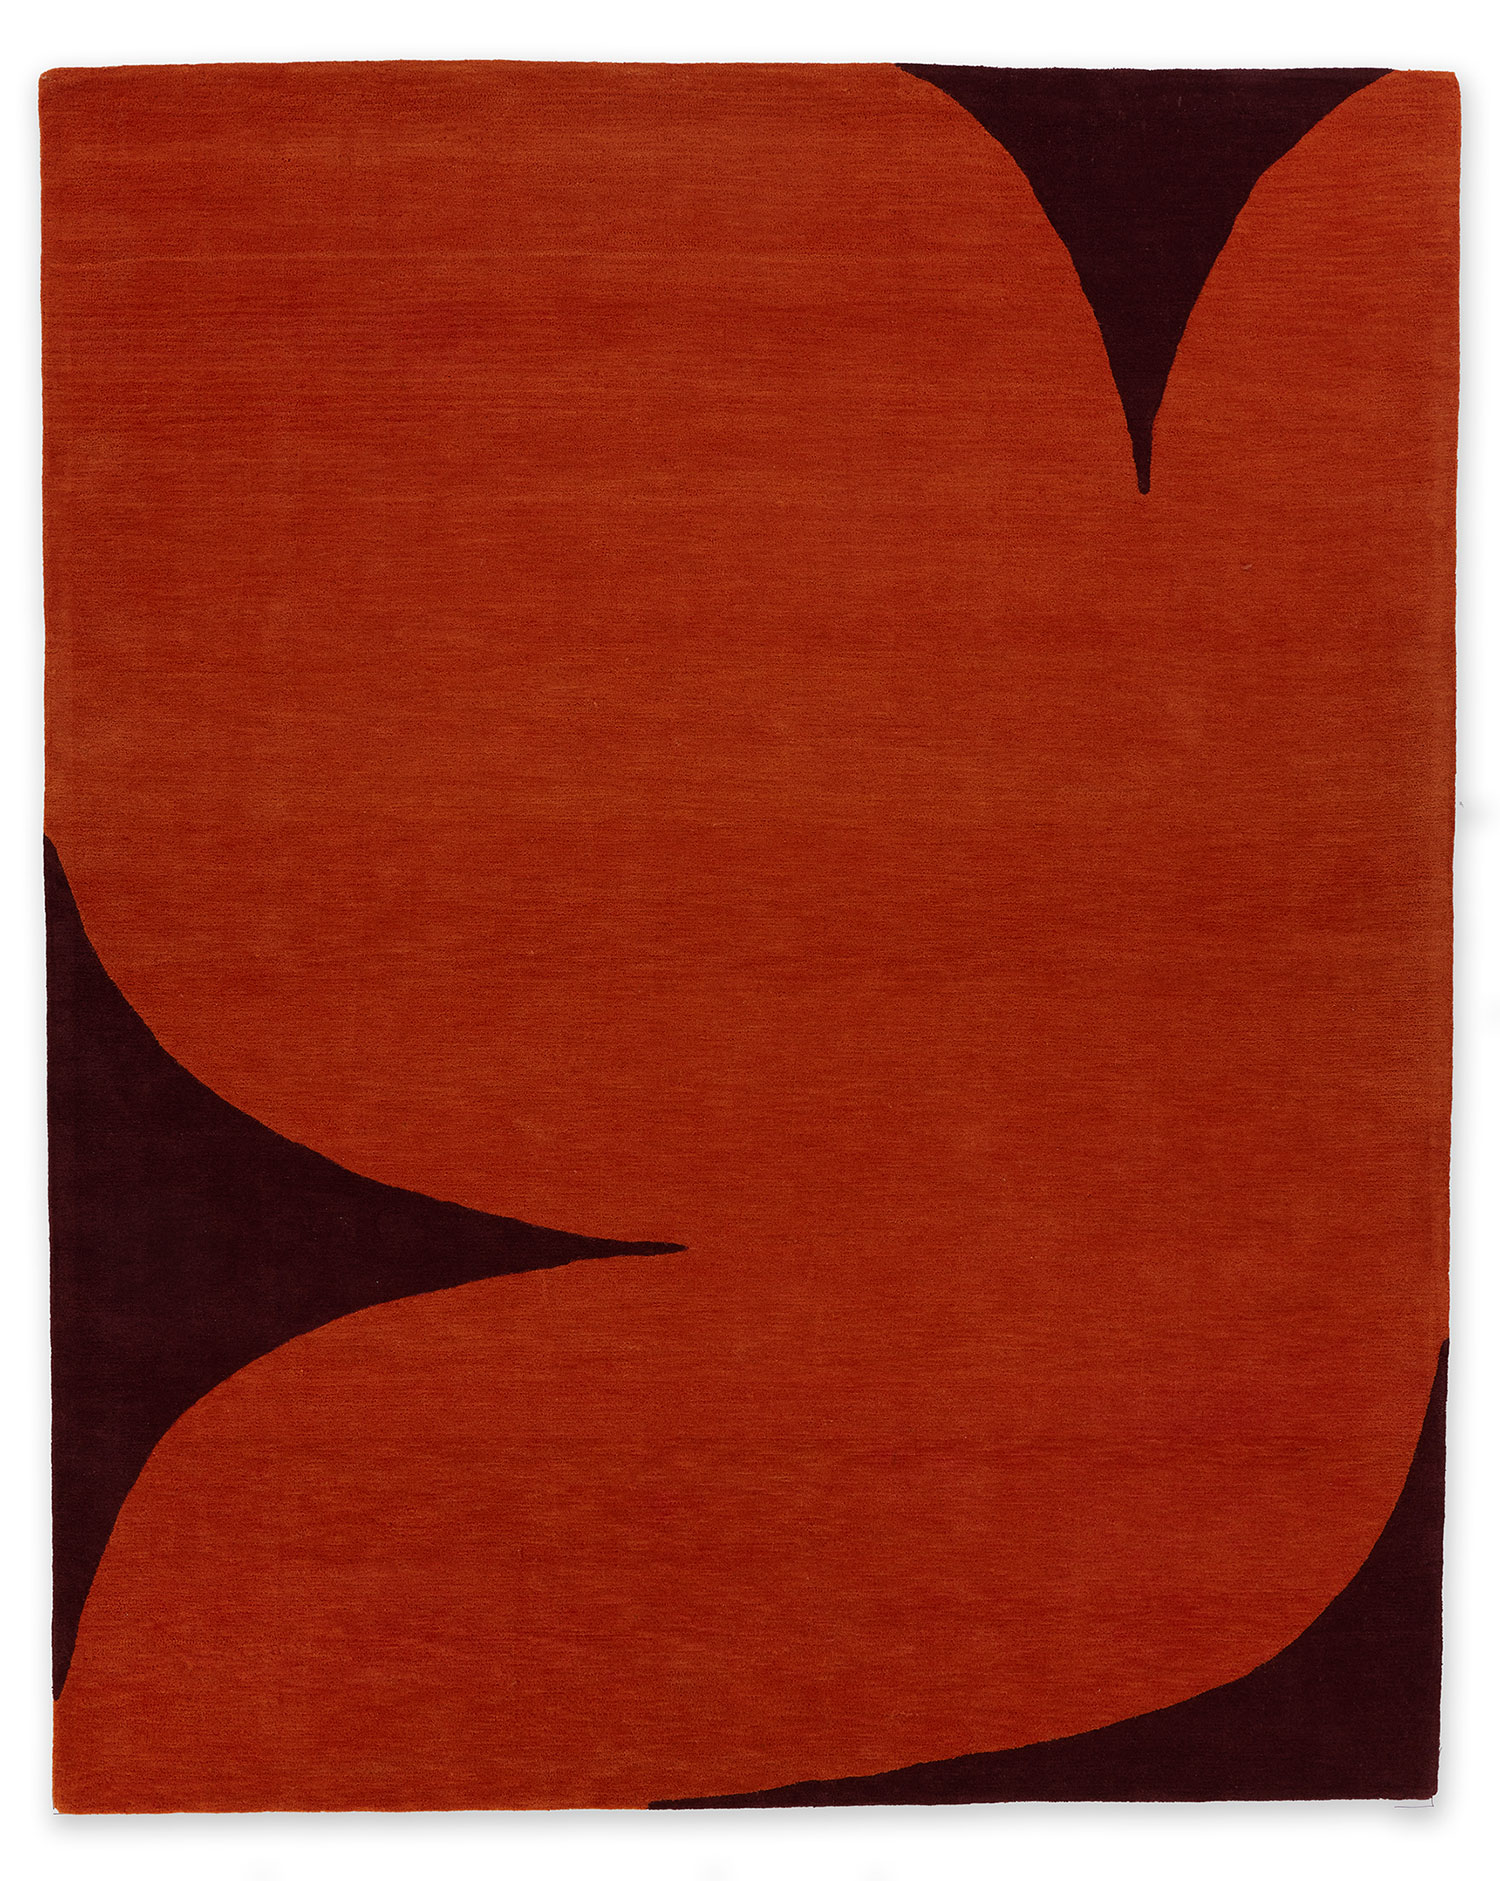 A modern, hand tufted area rug with dove pattern in orange and dark red colors by Angela Adams called Dove Love